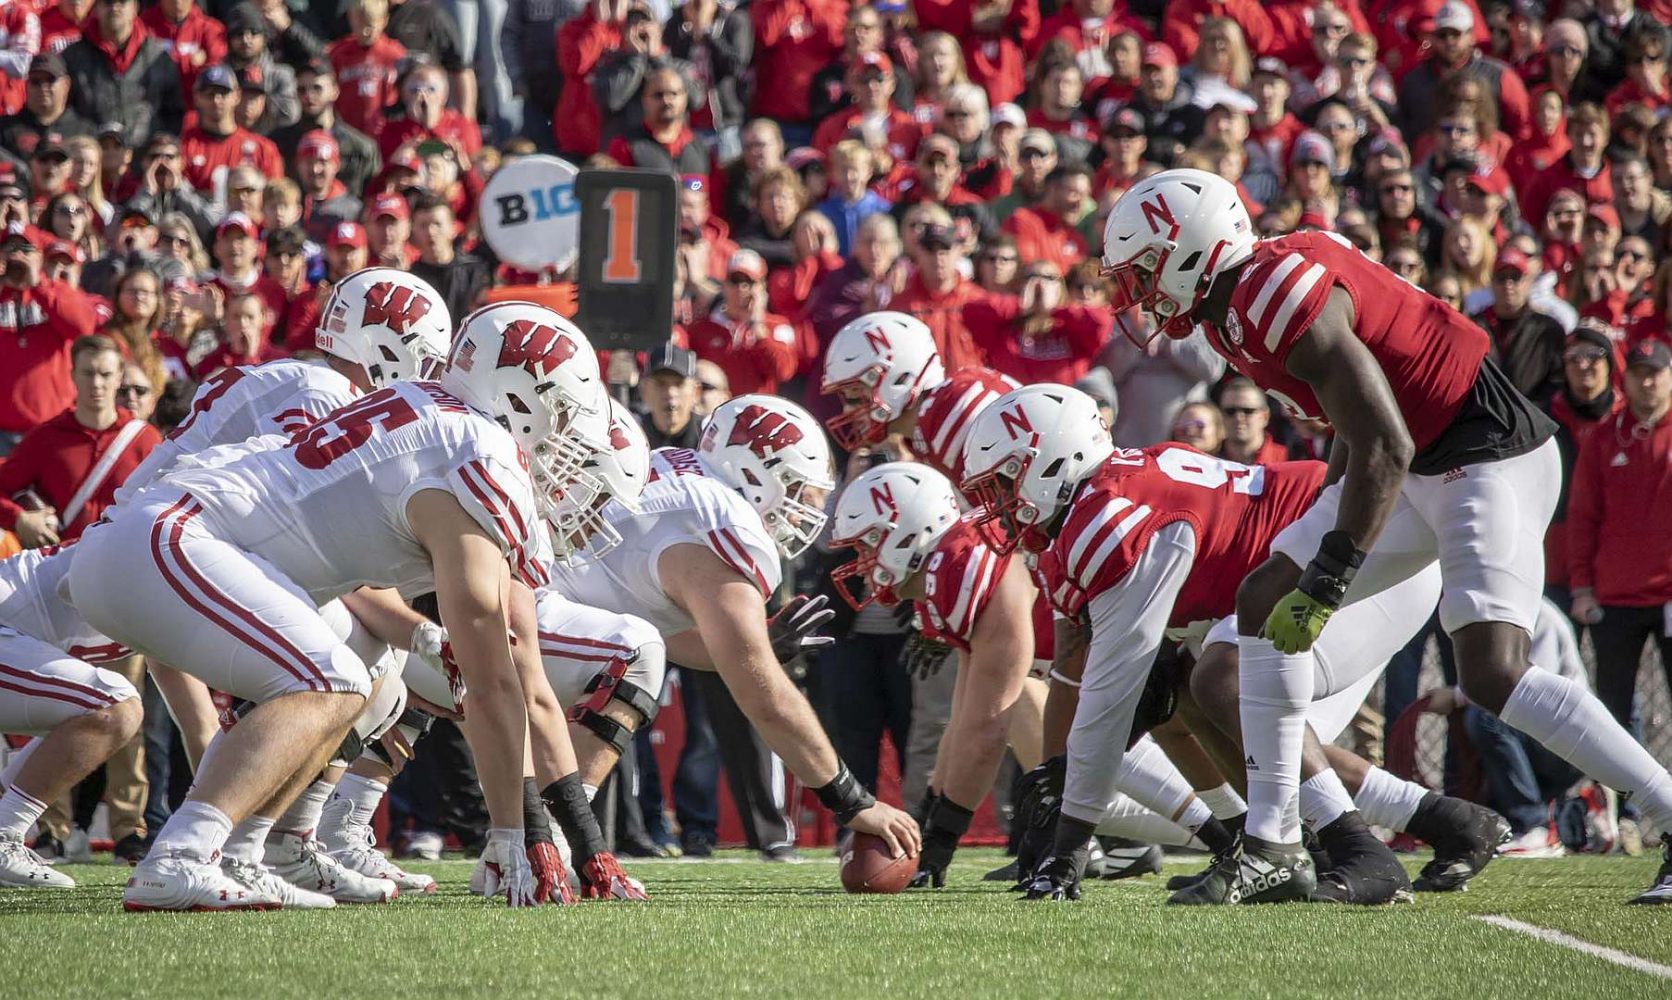 The Blackshirts line up against the Wisconsin offense